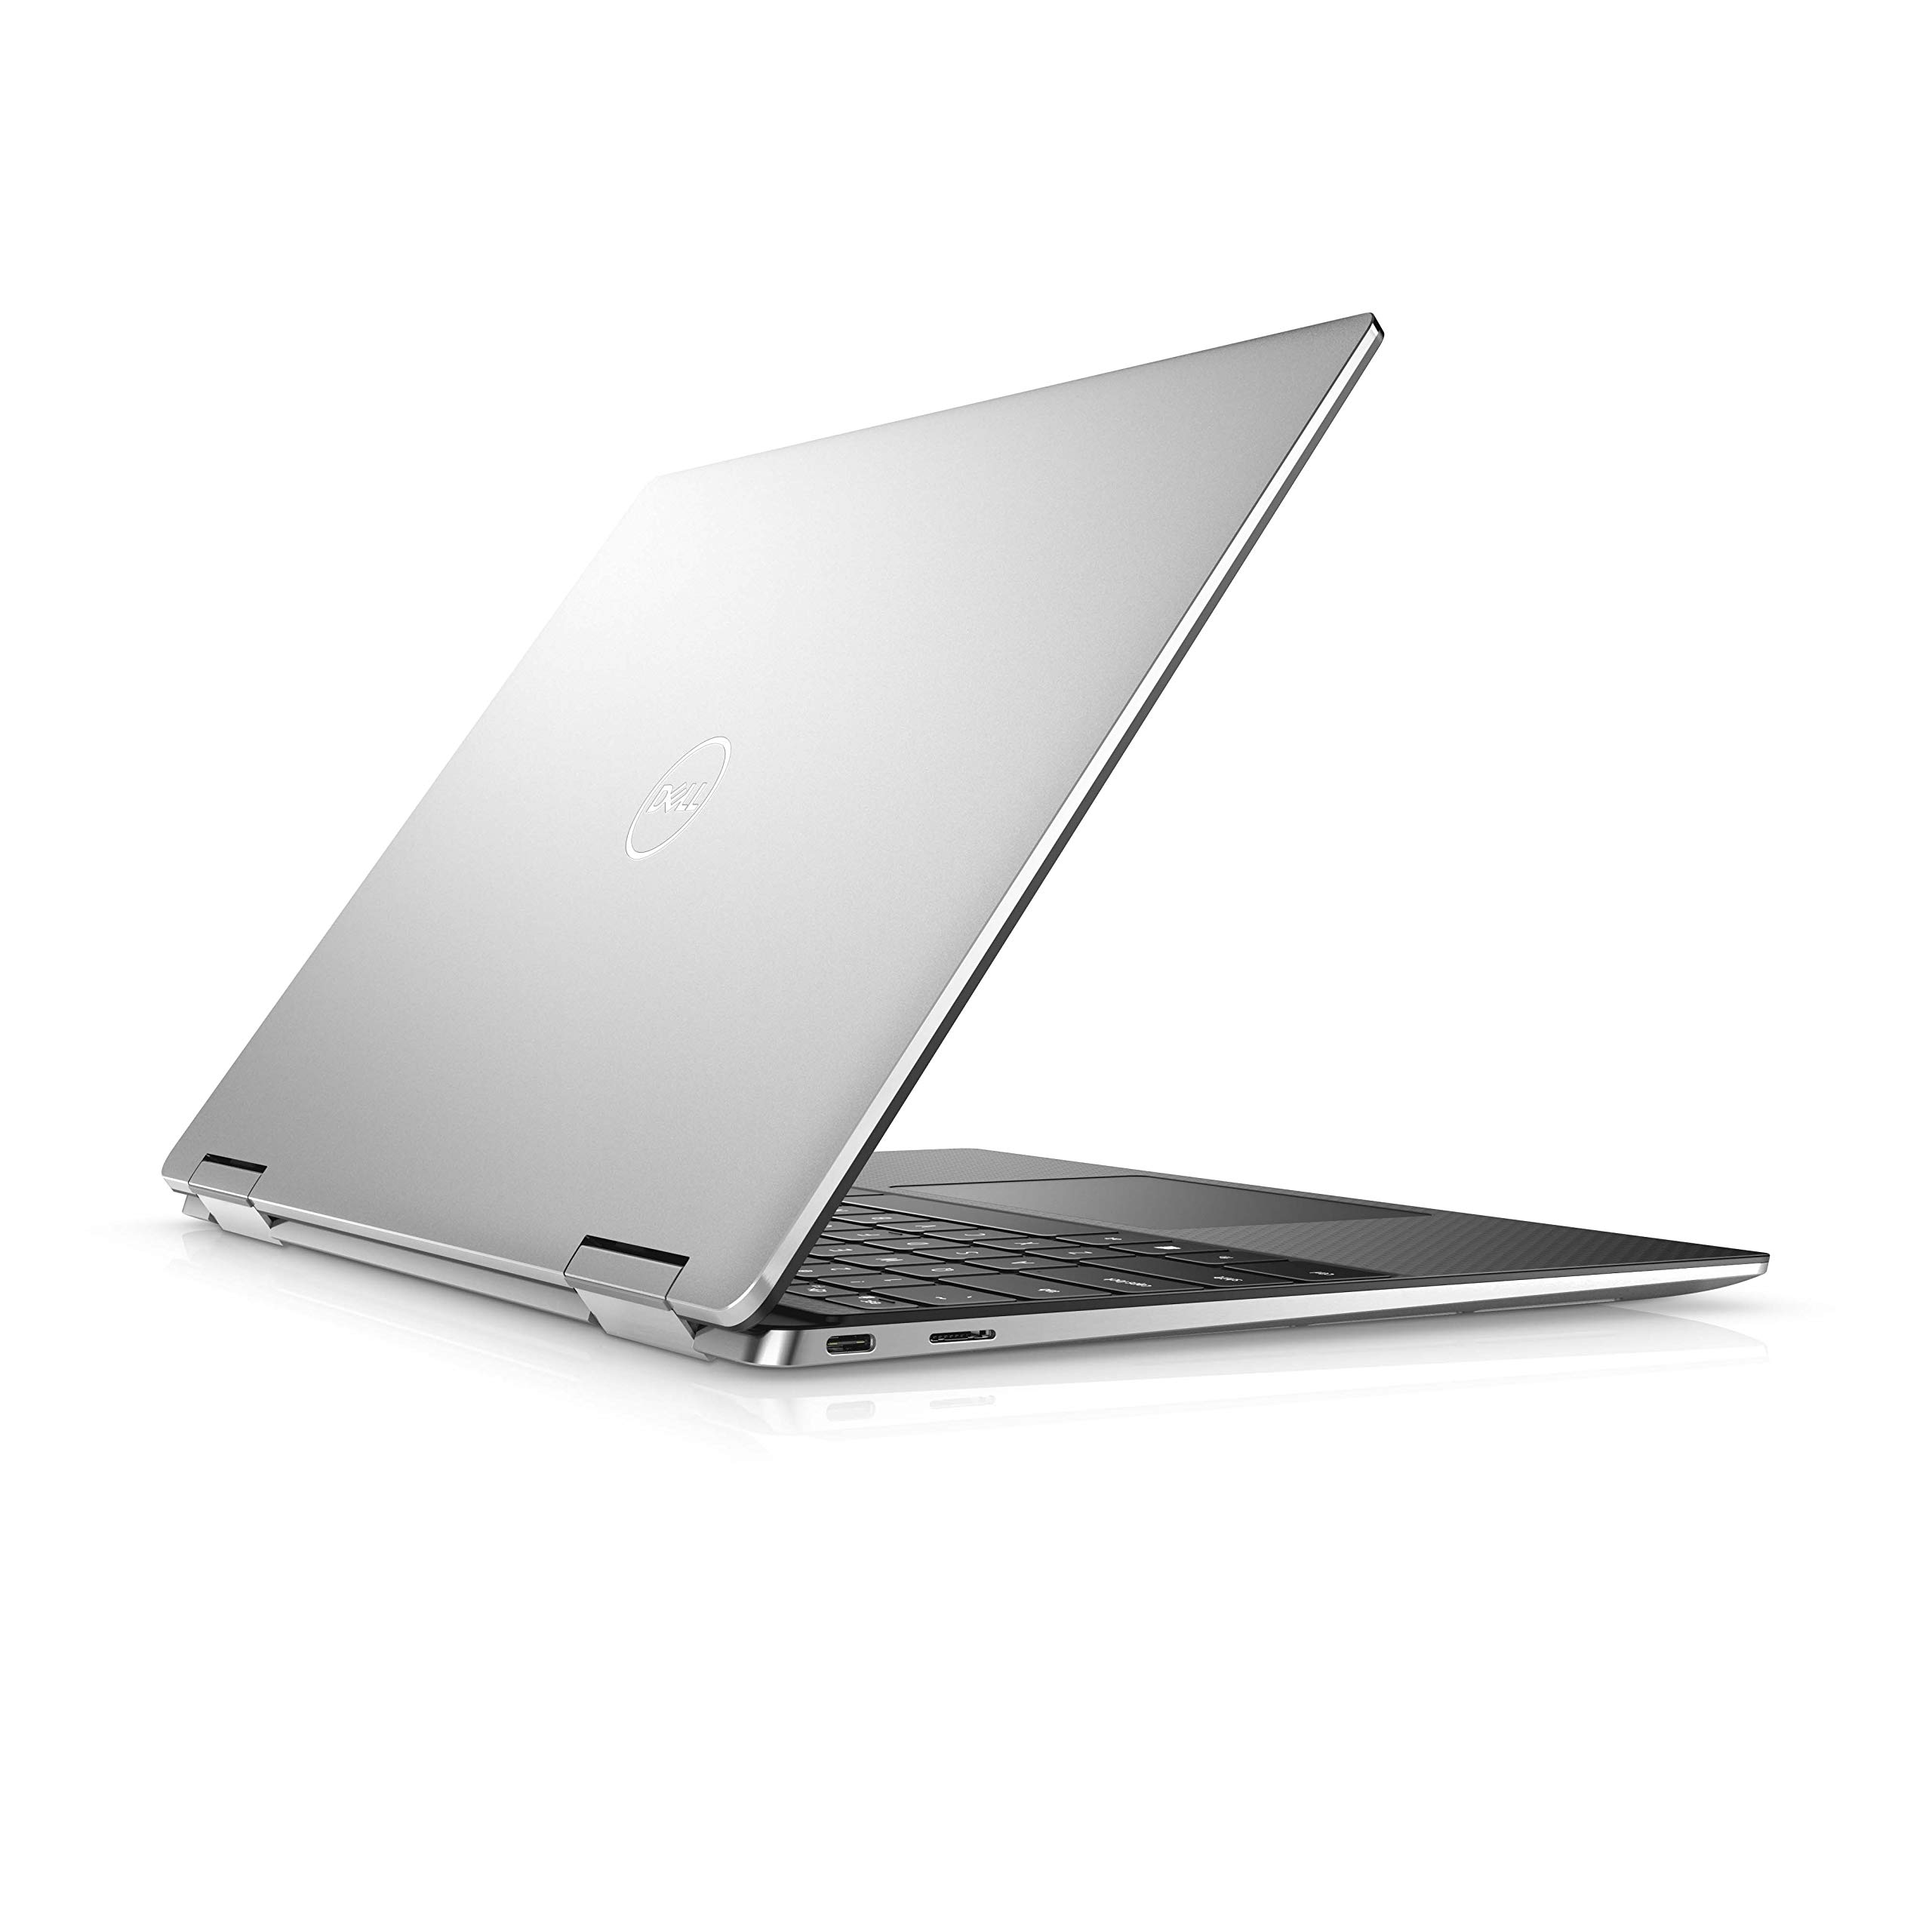 Dell 9310 XPS 2 in 1 Convertible, 13.4 Inch FHD+ Touchscreen Laptop, Intel Core i7-1165G7, 32GB 4267MHz LPDDR4x RAM, 512GB SSD, Intel Iris Xe Graphics, Windows 10 Home - Platinum Silver